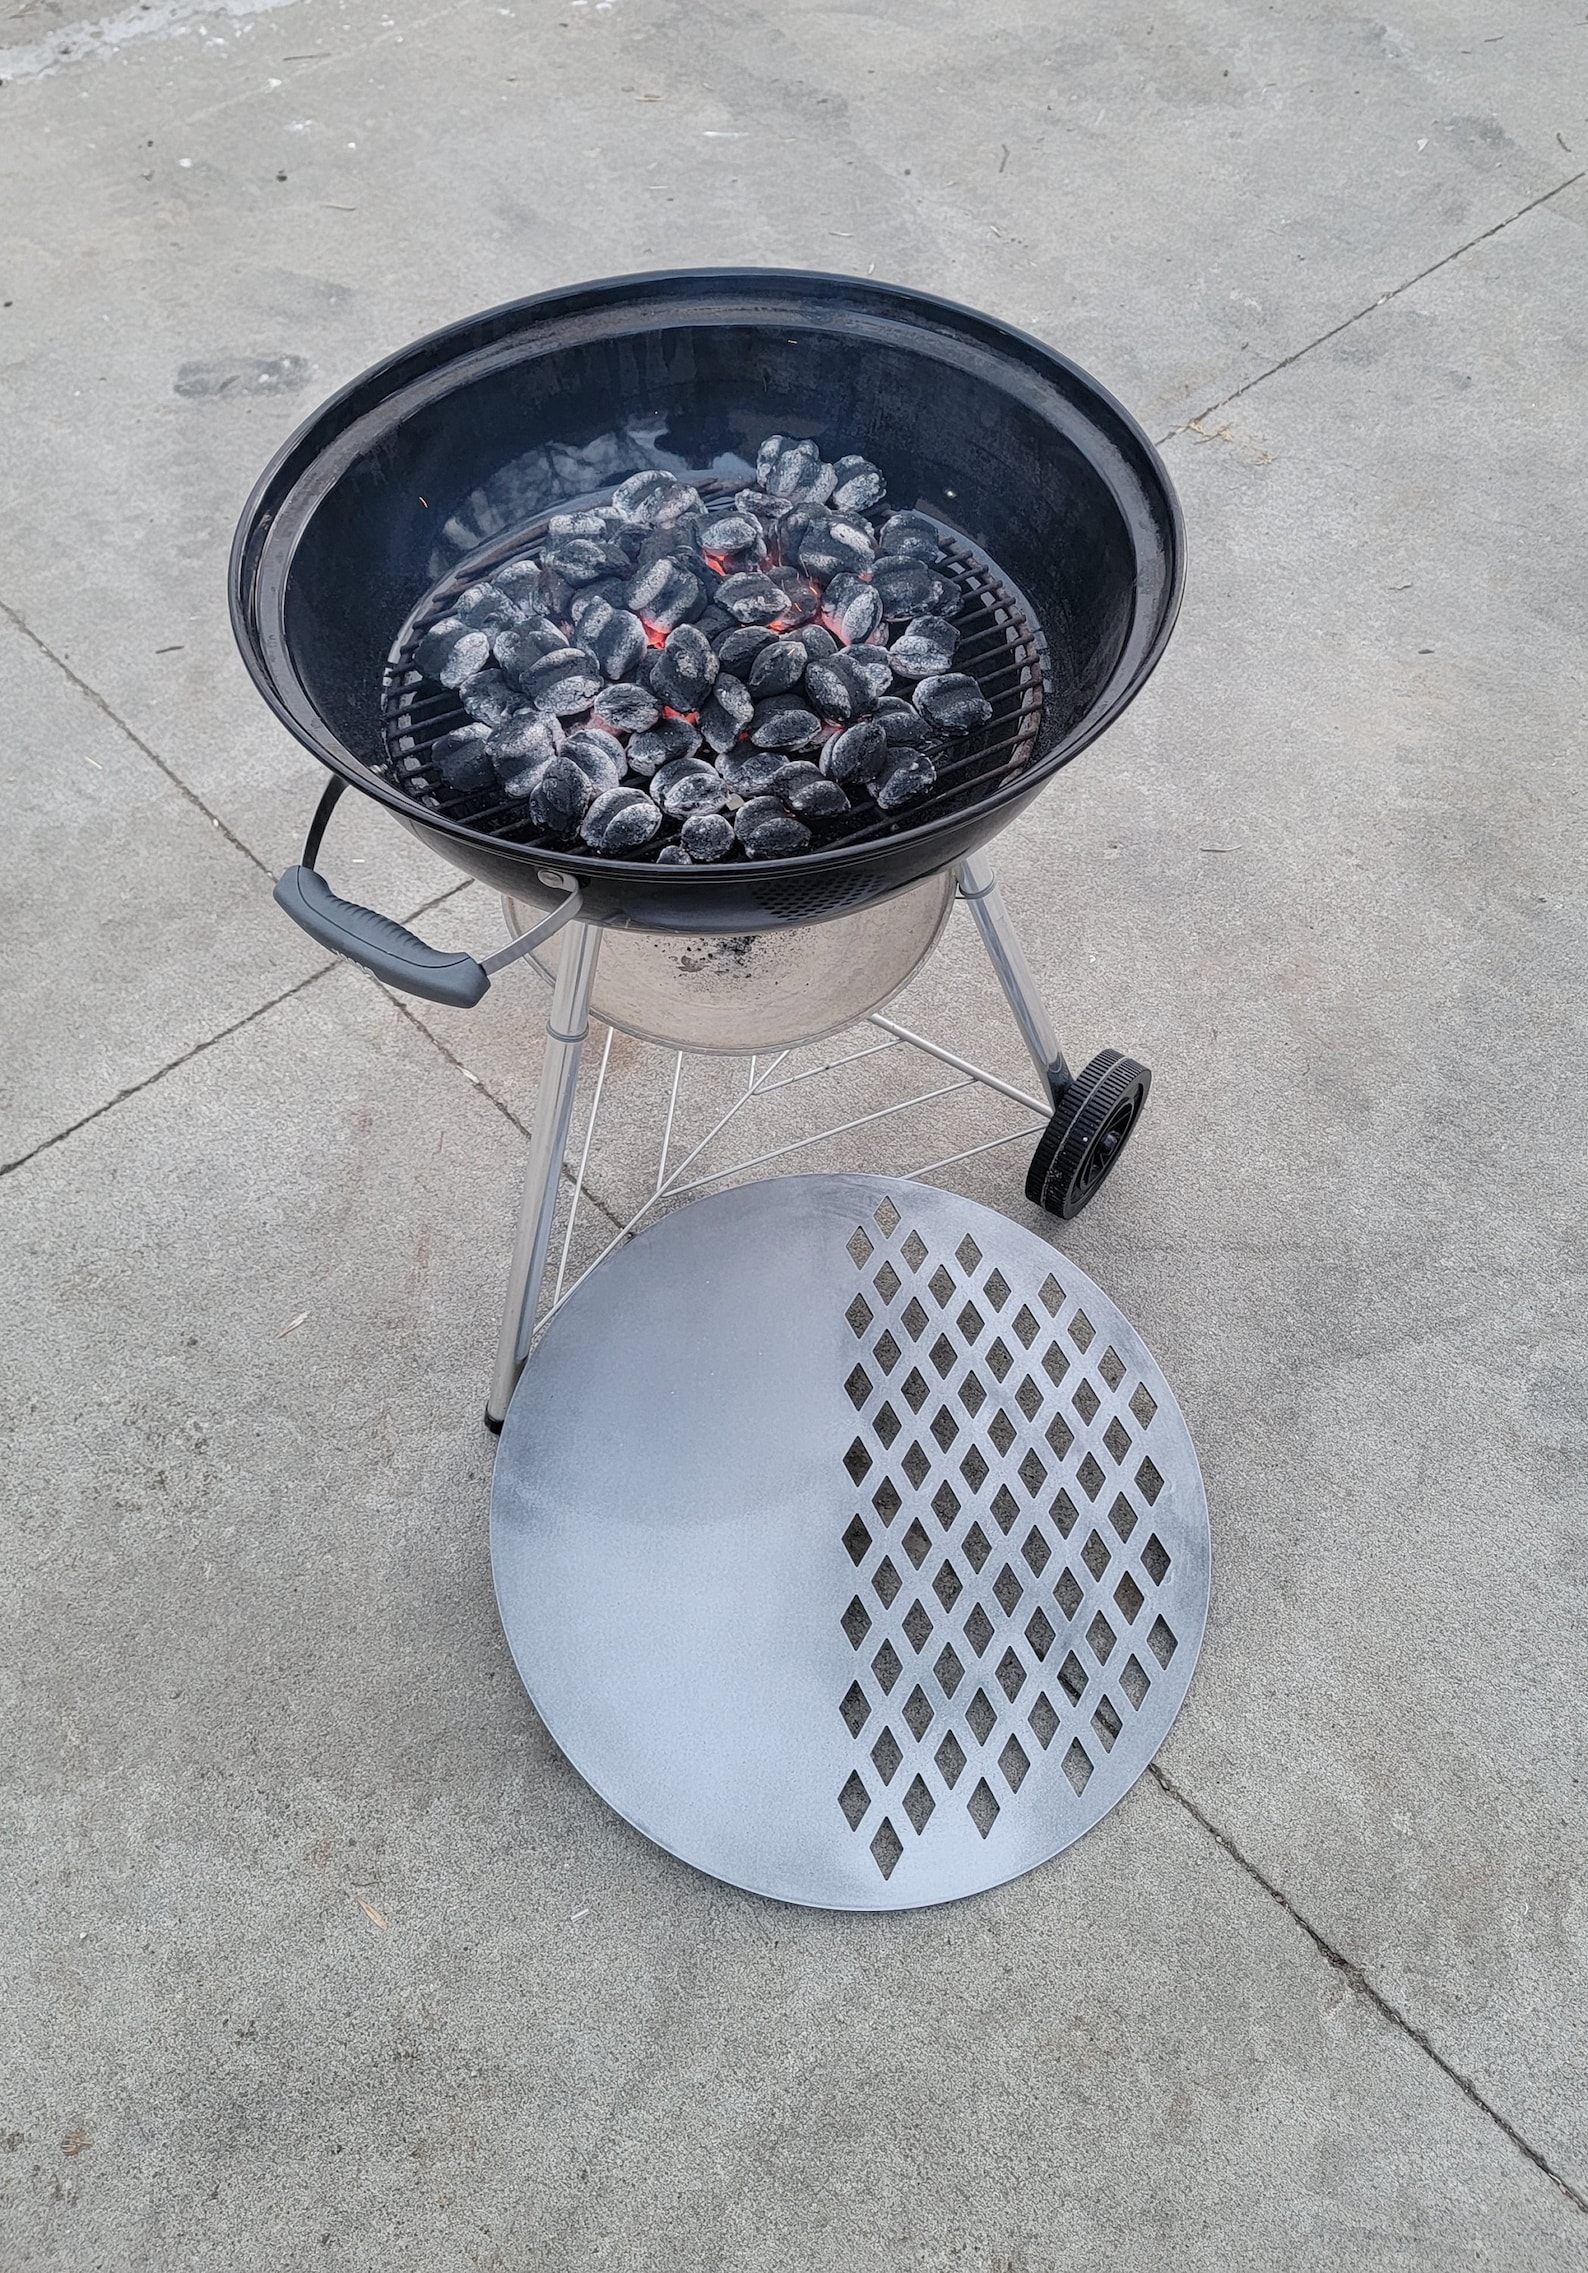 Outfitters Edge 22 Round Charcoal Grill Skillet Insert - Etsy